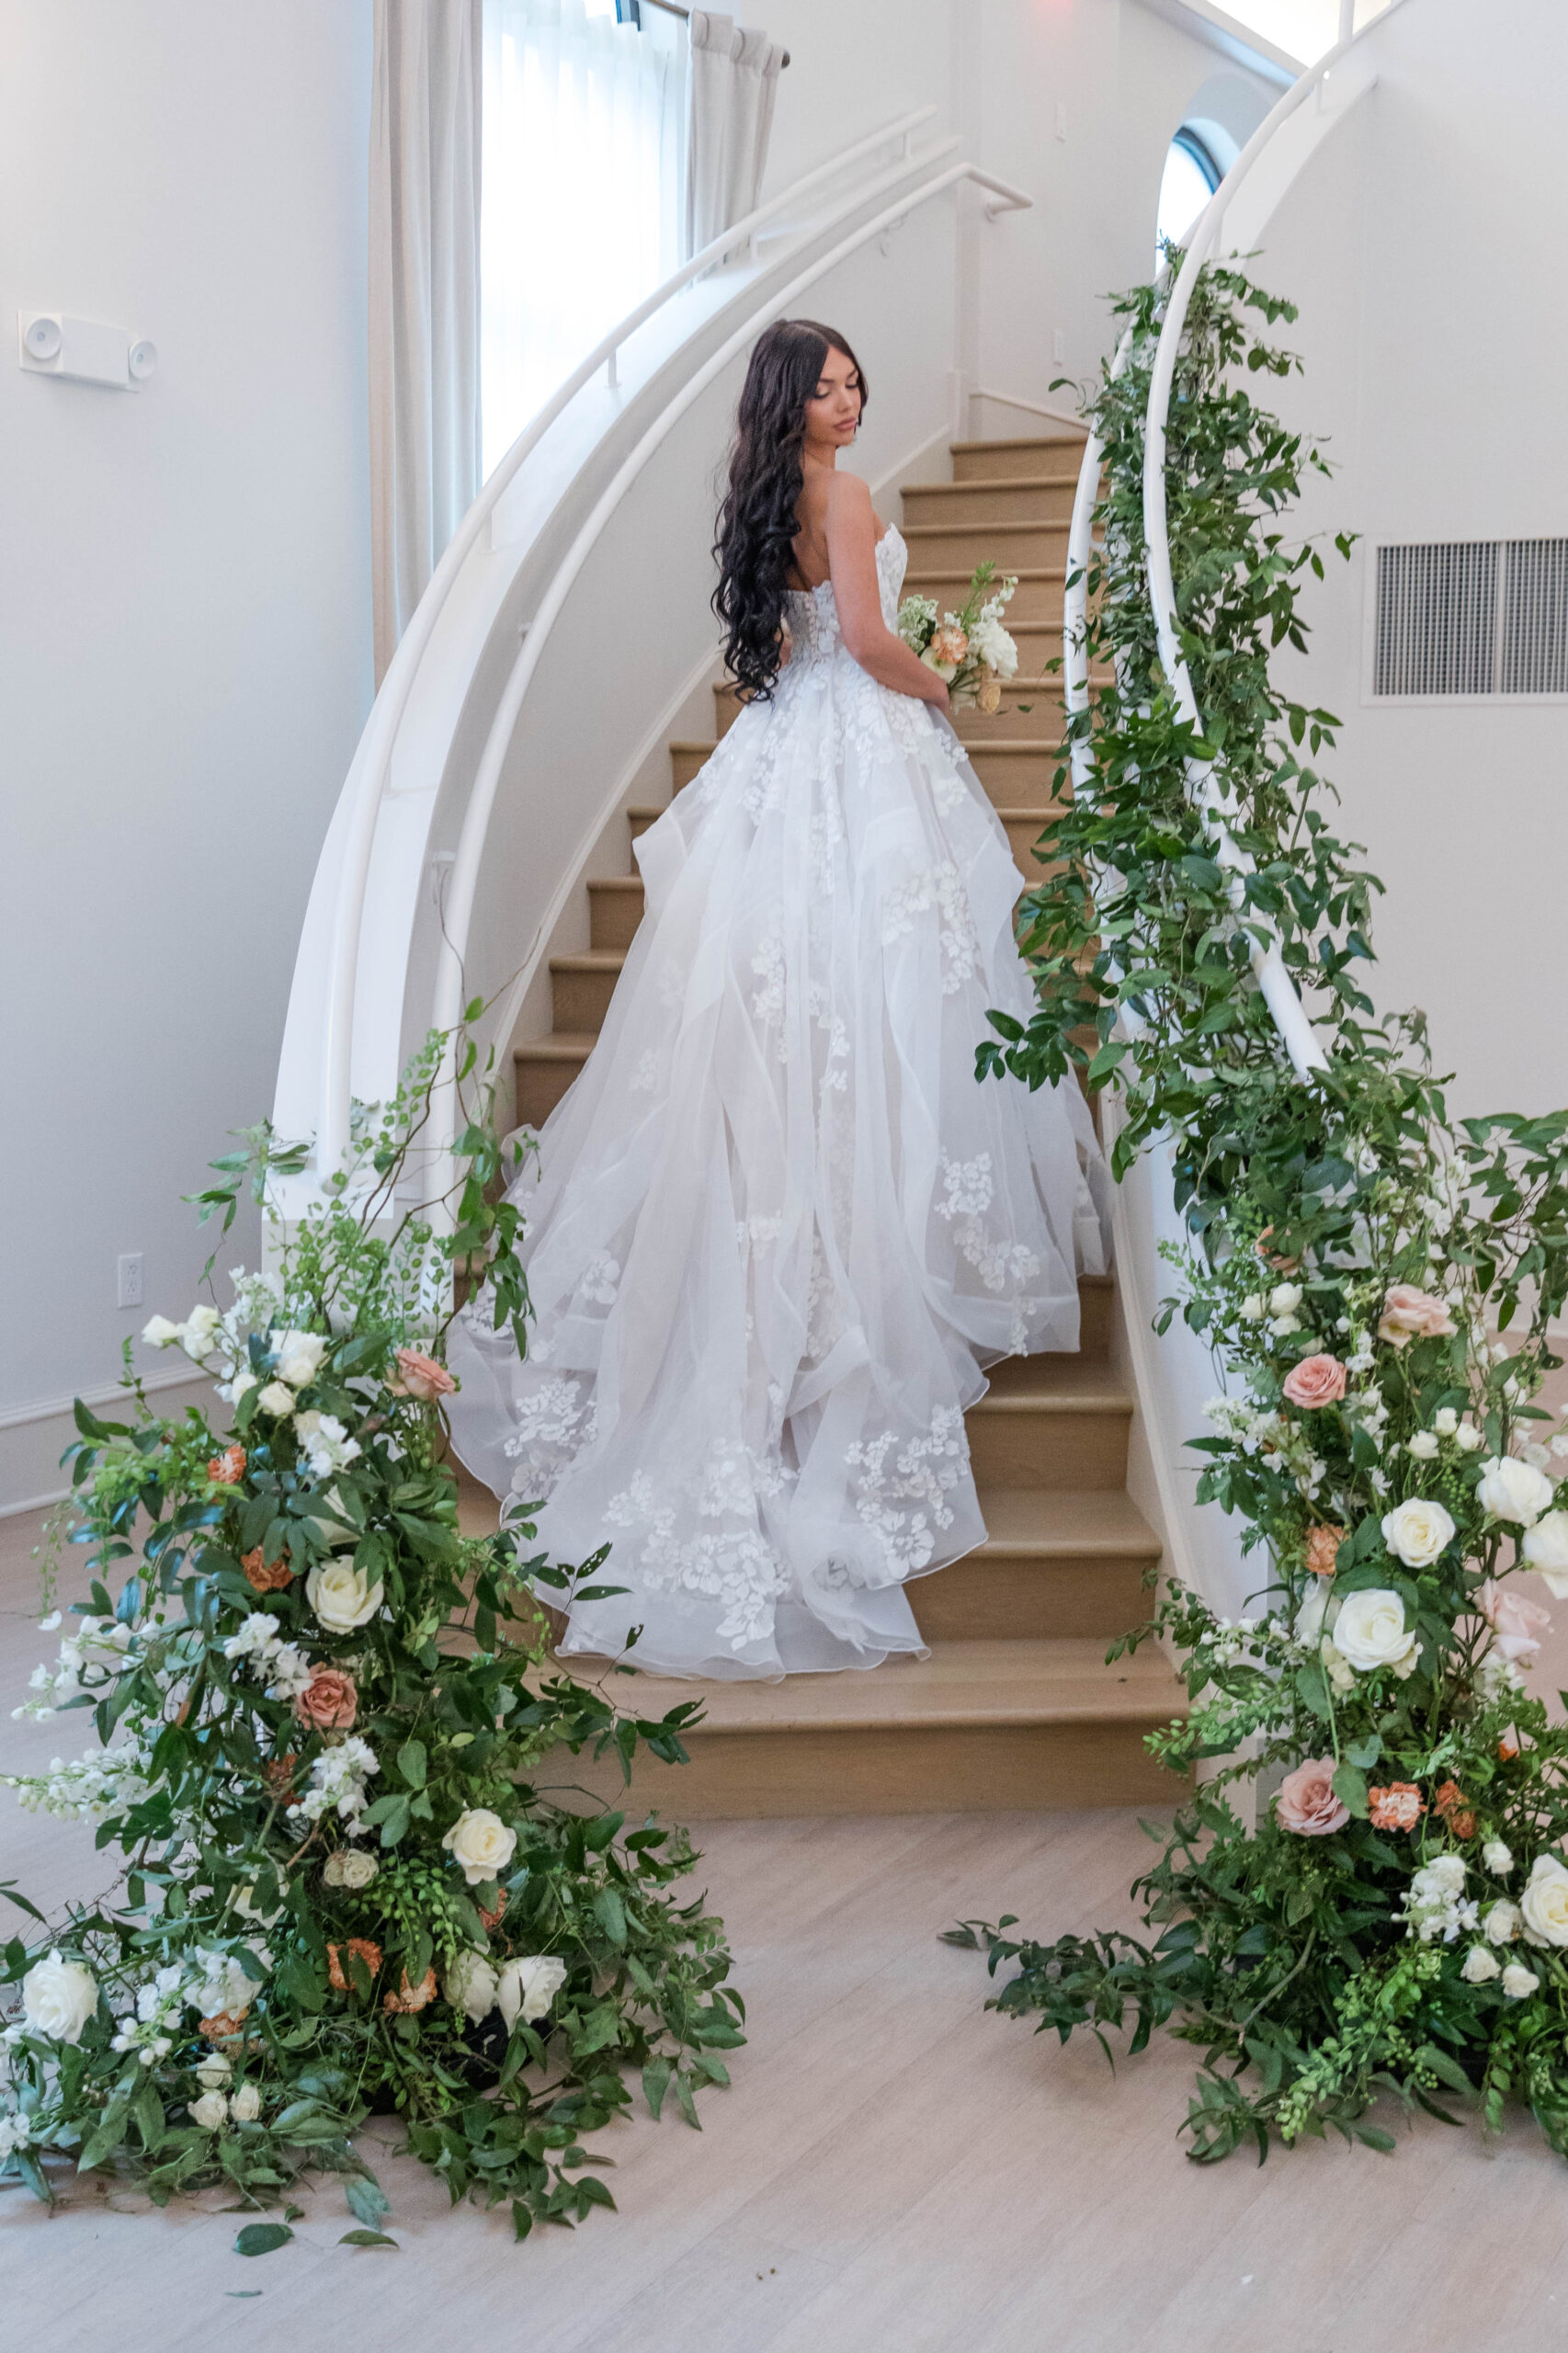 Bride on staircase with florals